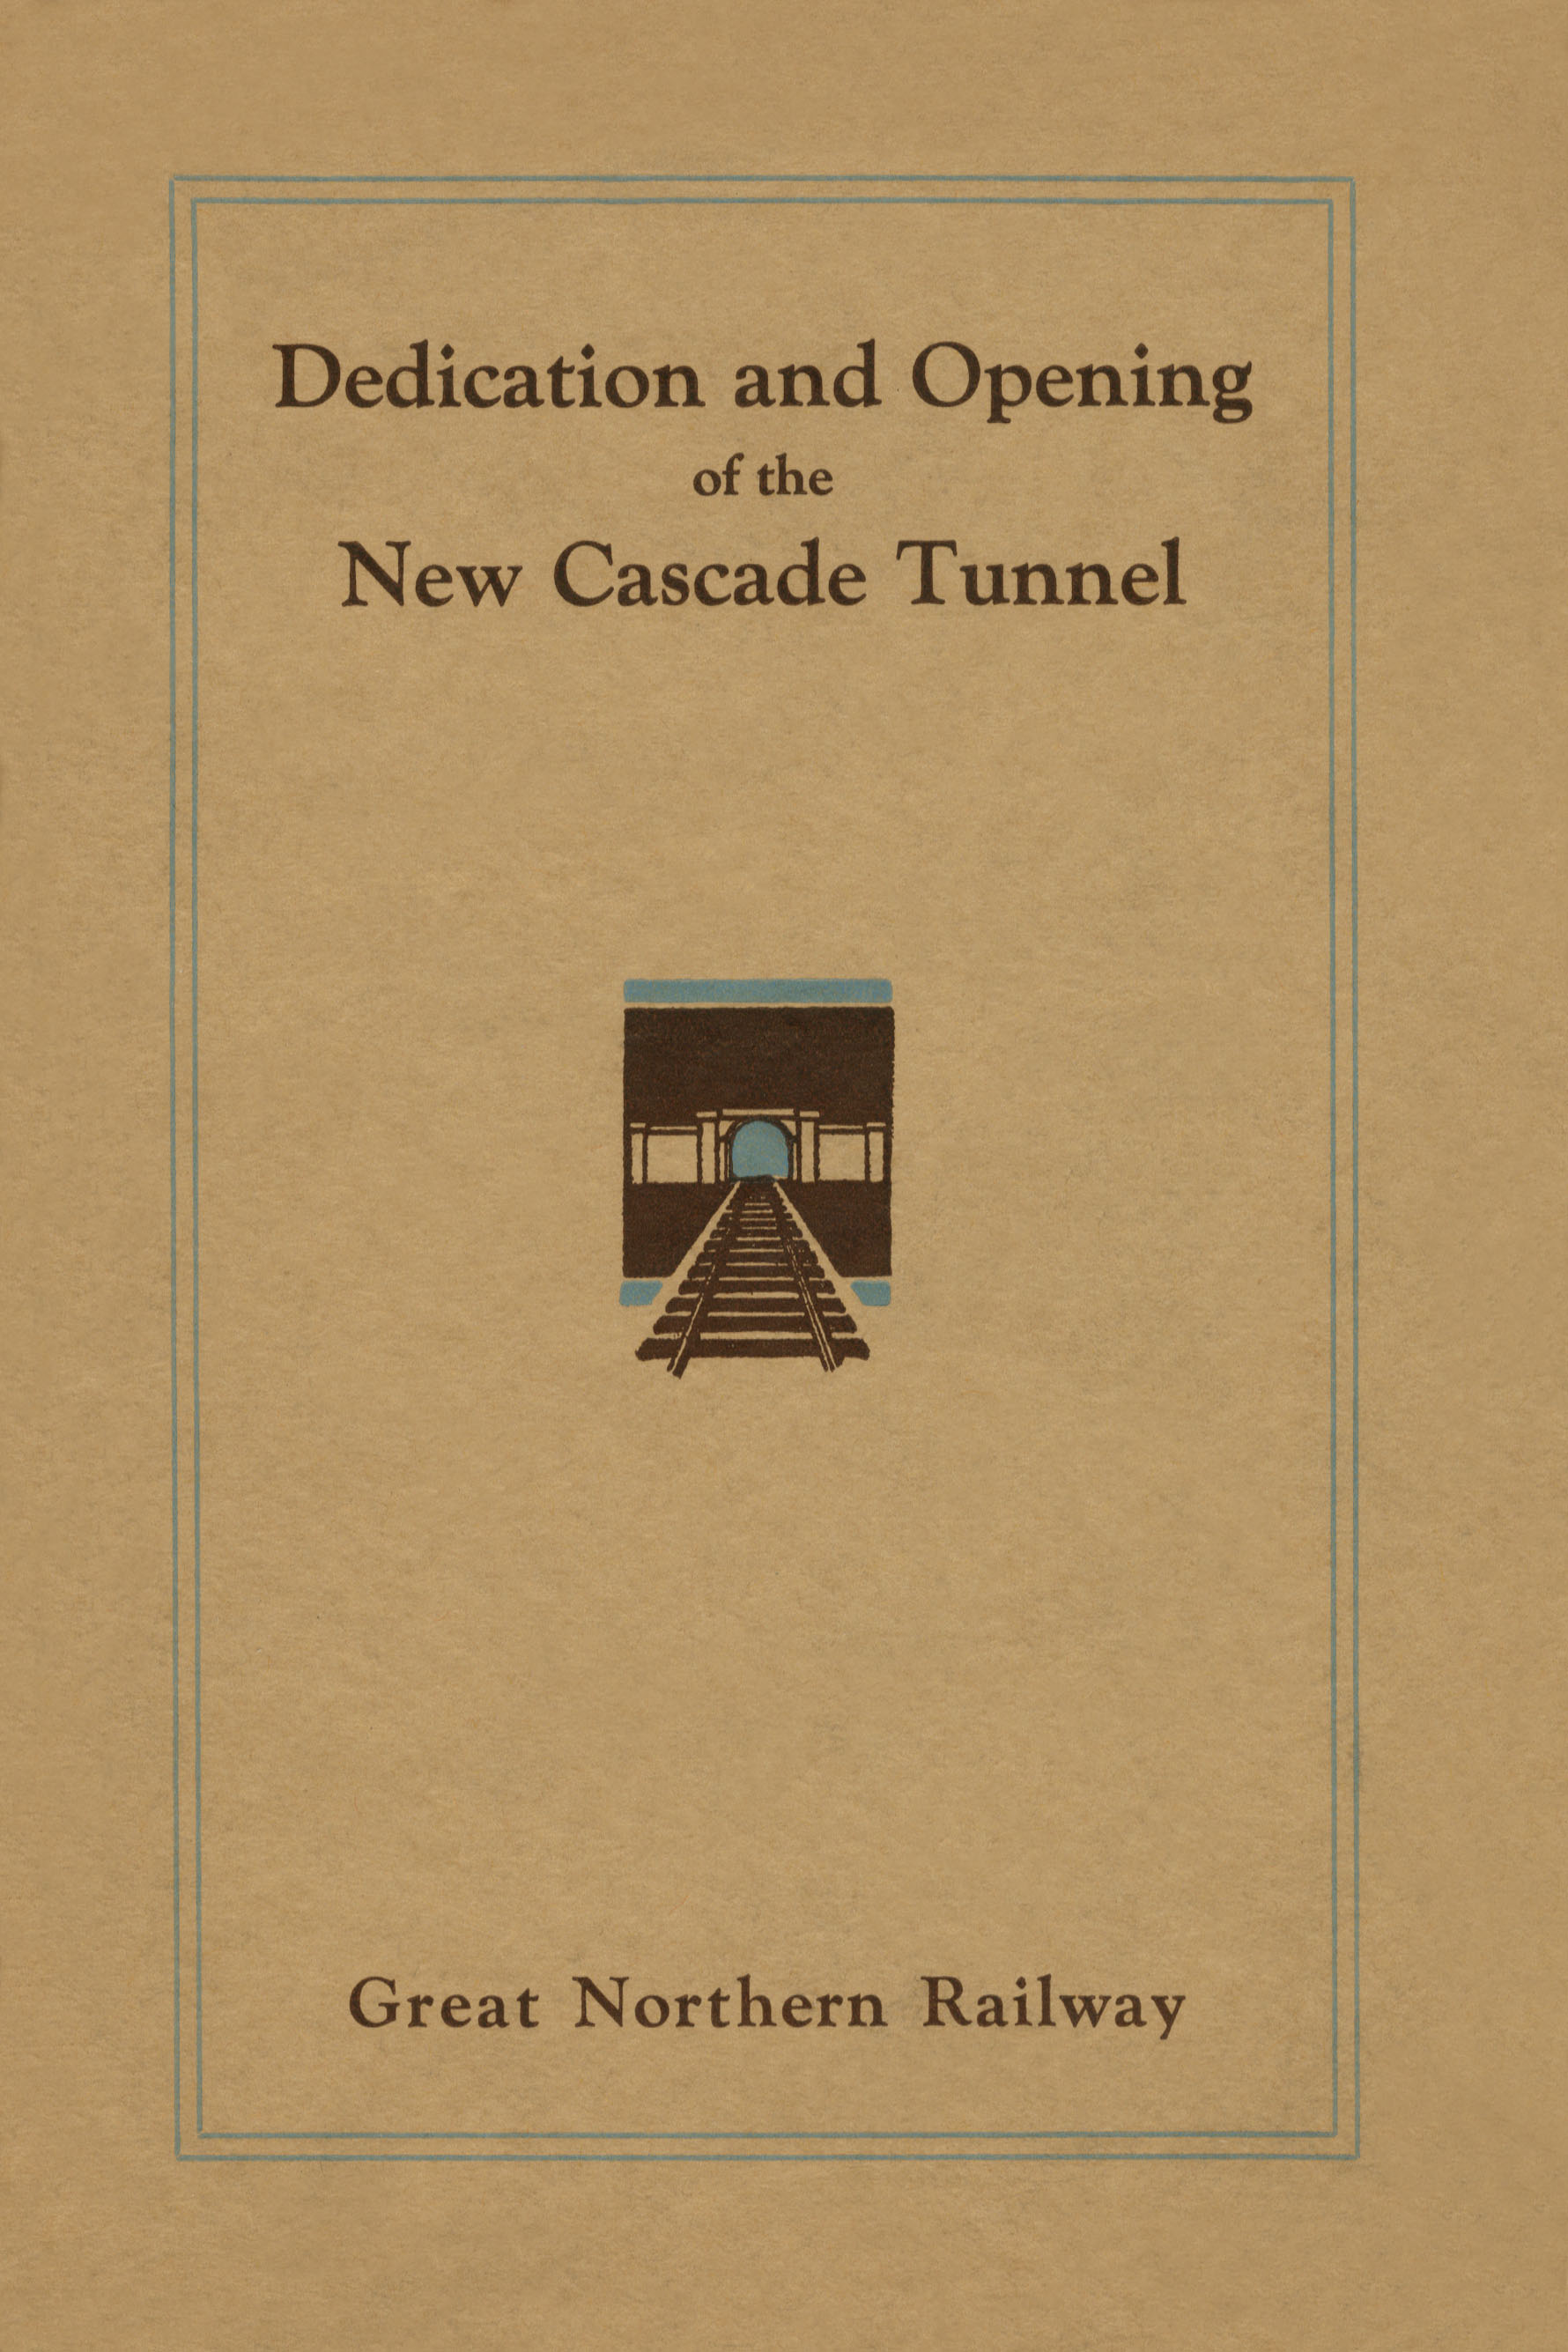 Opening of the New Cascade Tunnel